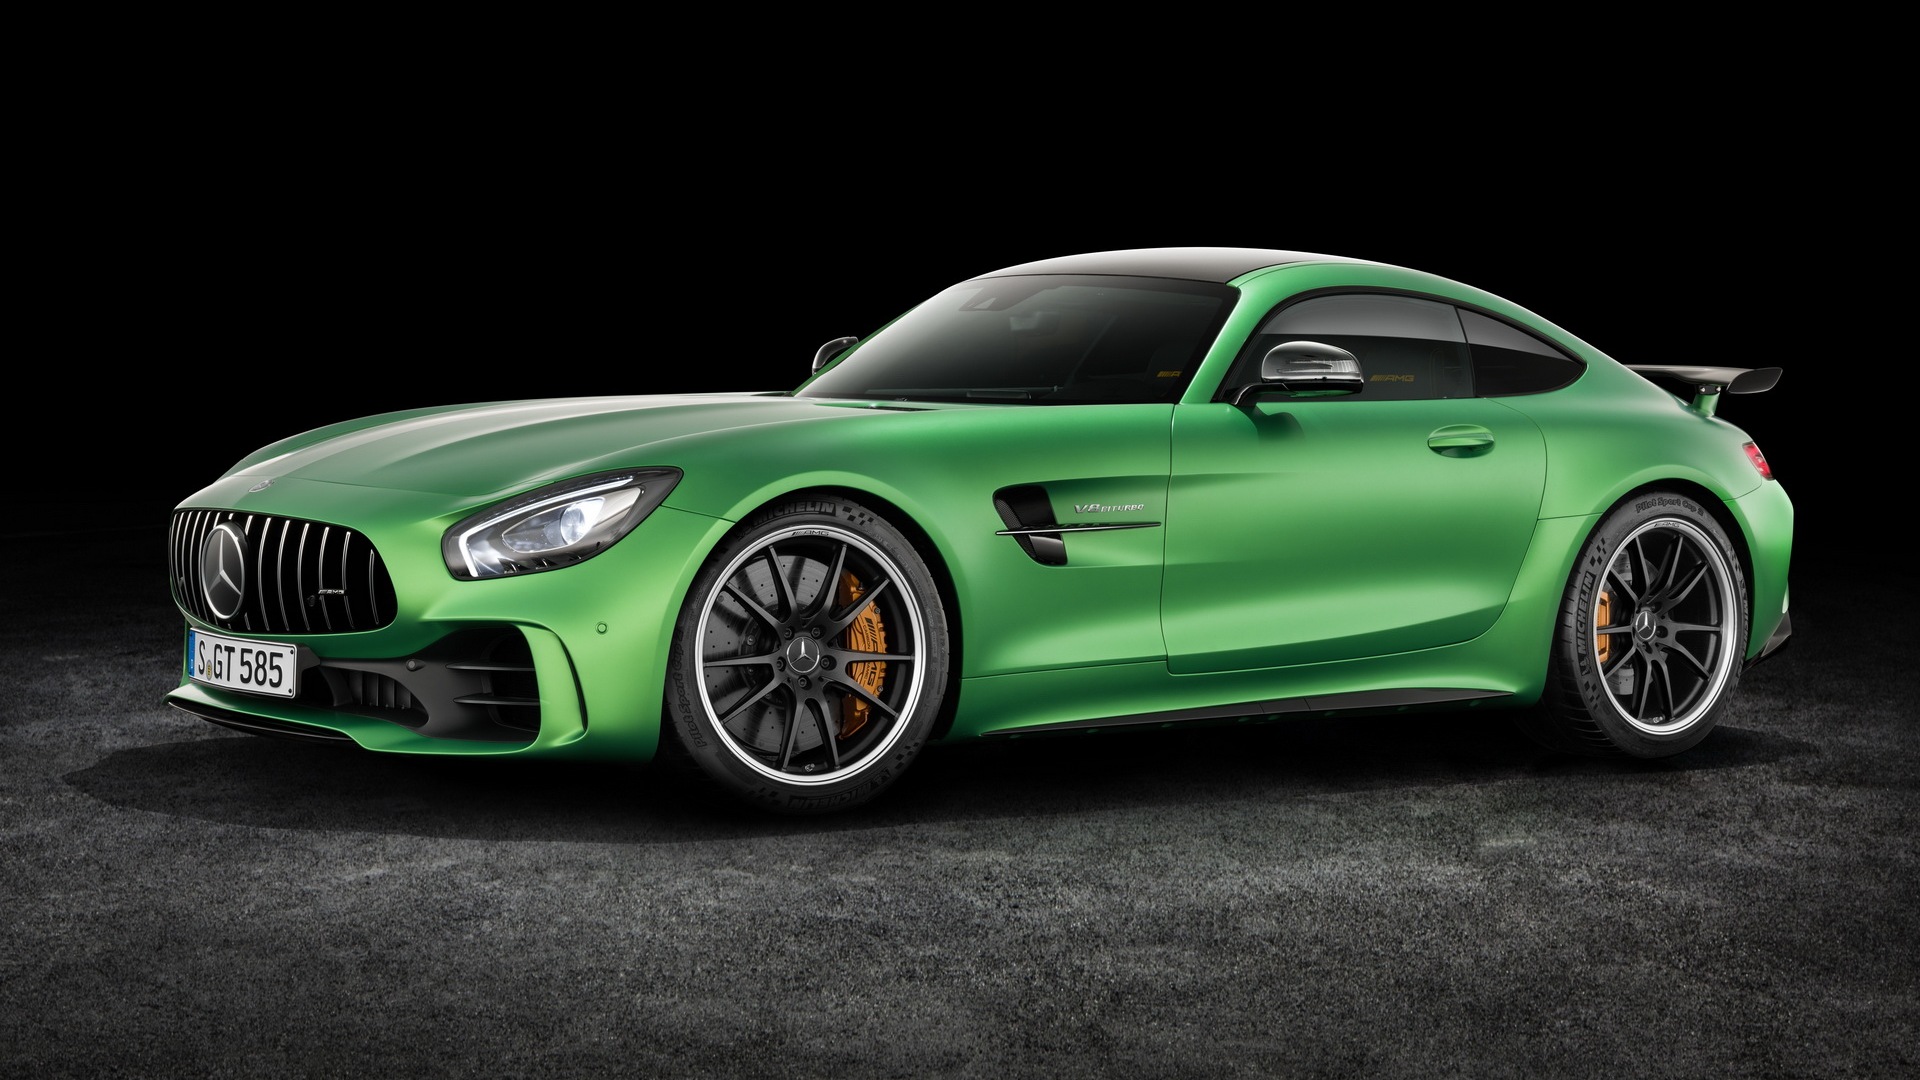 Mercedes Benz AMG GT R photos and wallpapers   tuningnewsnet